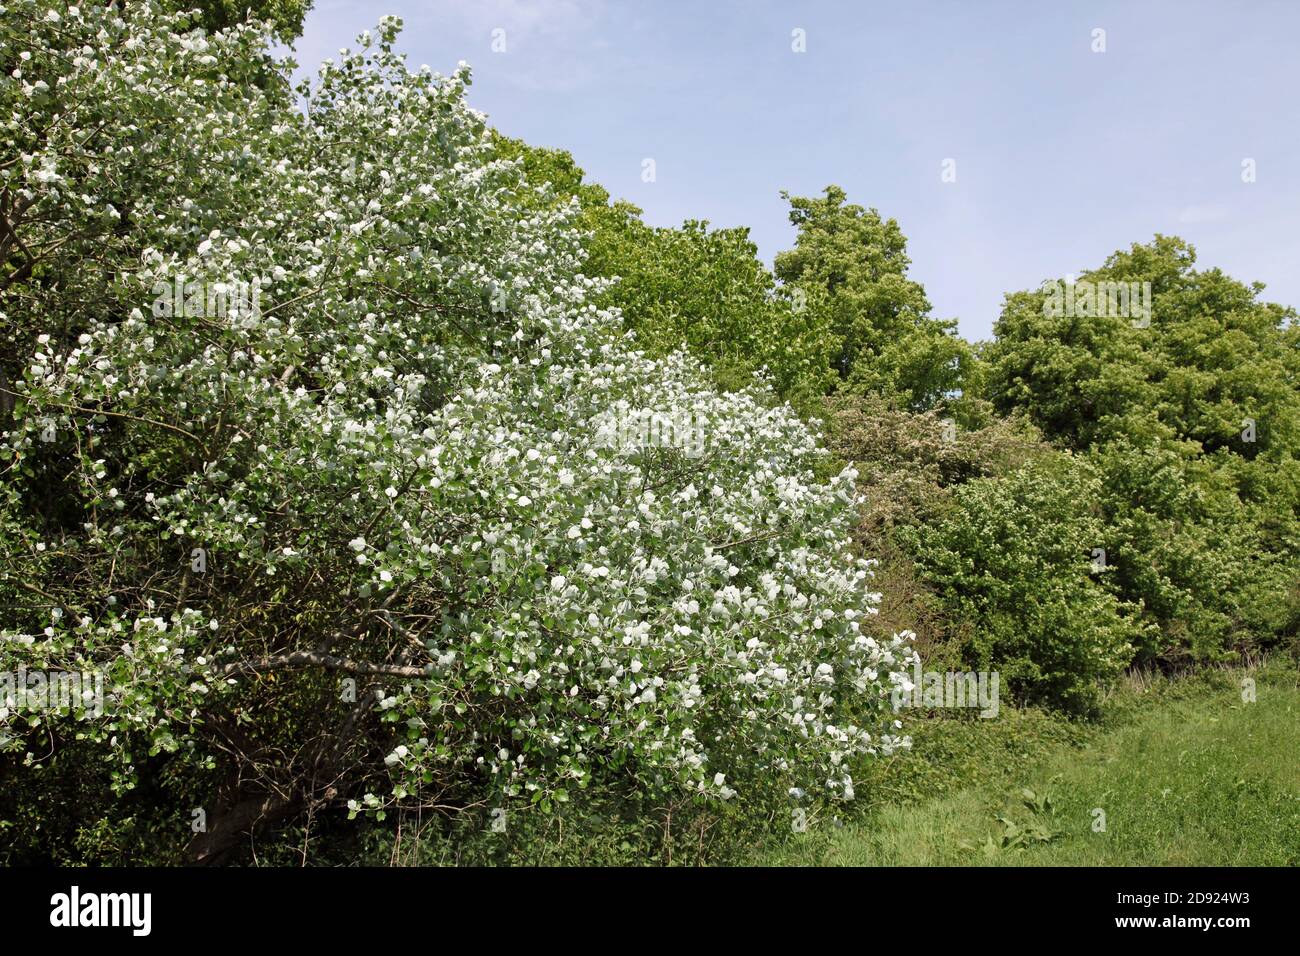 Grey Poplar tree, and others, forming a barrier on the edge of a field. Taken at midday on a bright, spring day Stock Photo